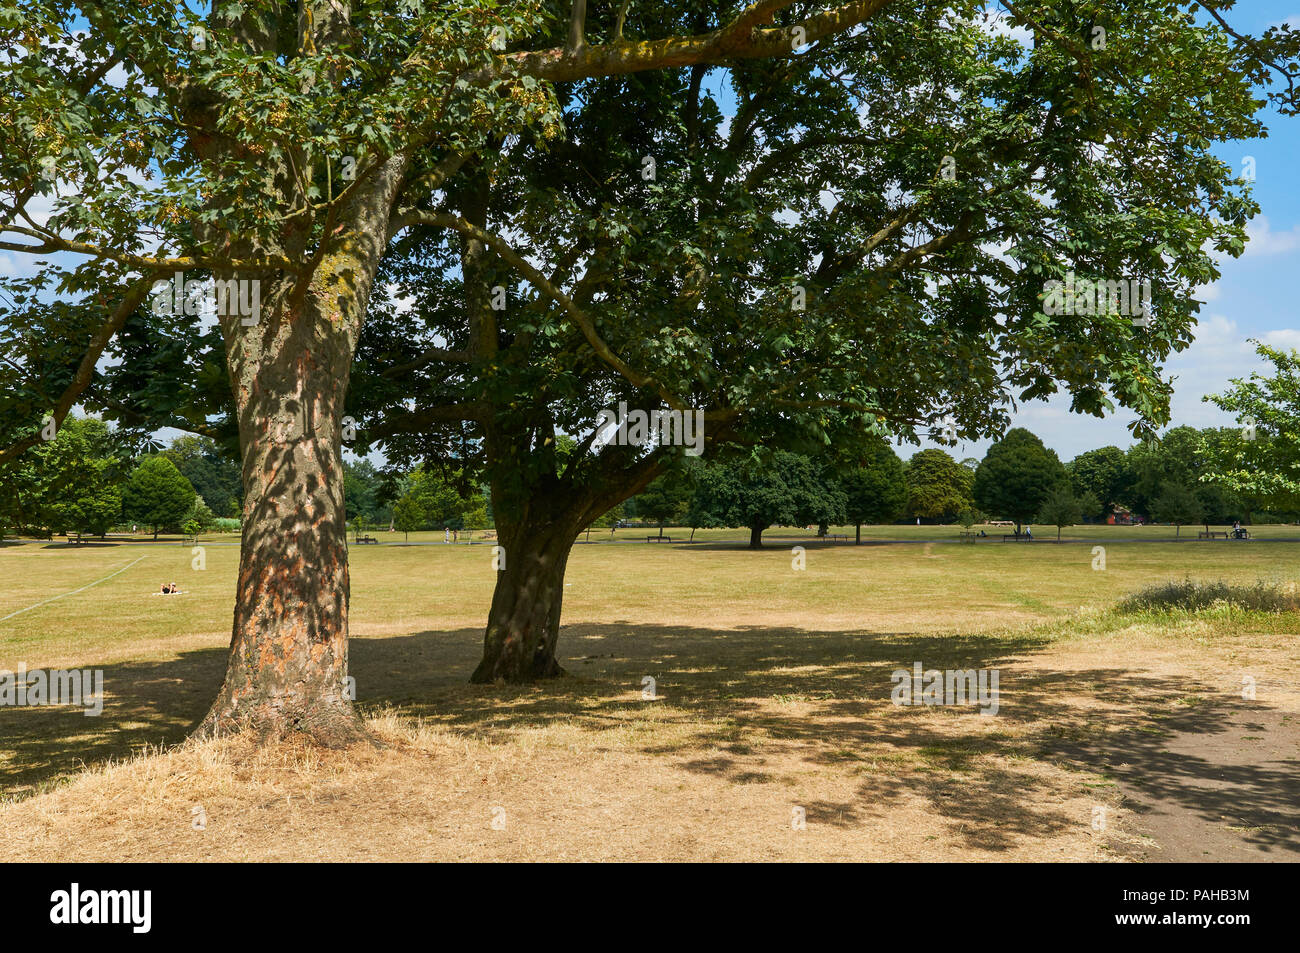 Trees in Clissold Park, Stoke Newington, North London UK, during the hot dry conditions of July 2018 Stock Photo